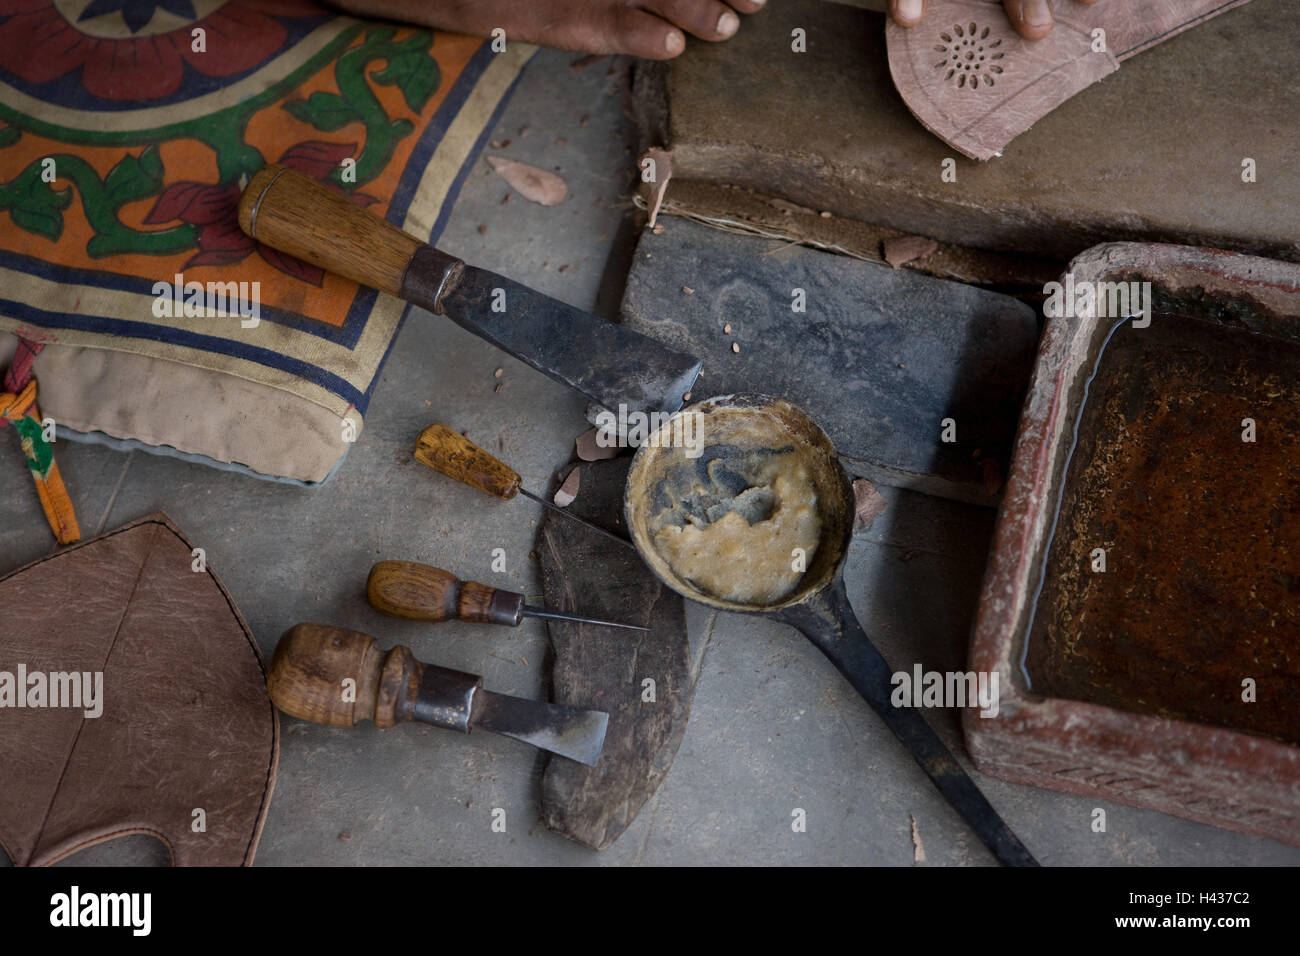 India, Rajasthan, Luni, shoemaker, leather ball, Punzieren, tools, glue, detail, no model release, Stock Photo